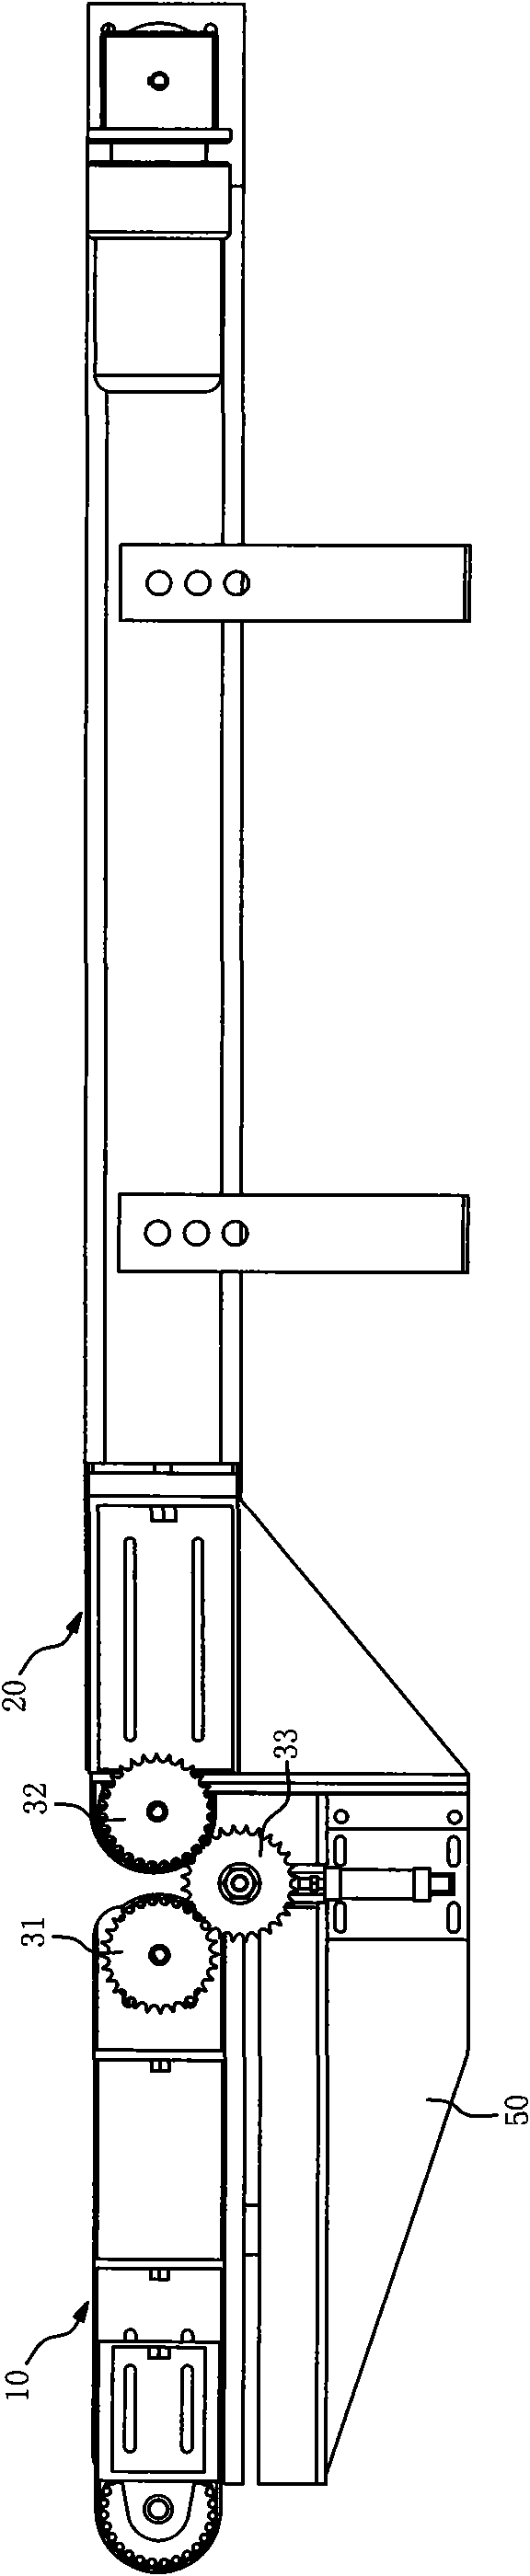 Belt conveying platform capable of weighing